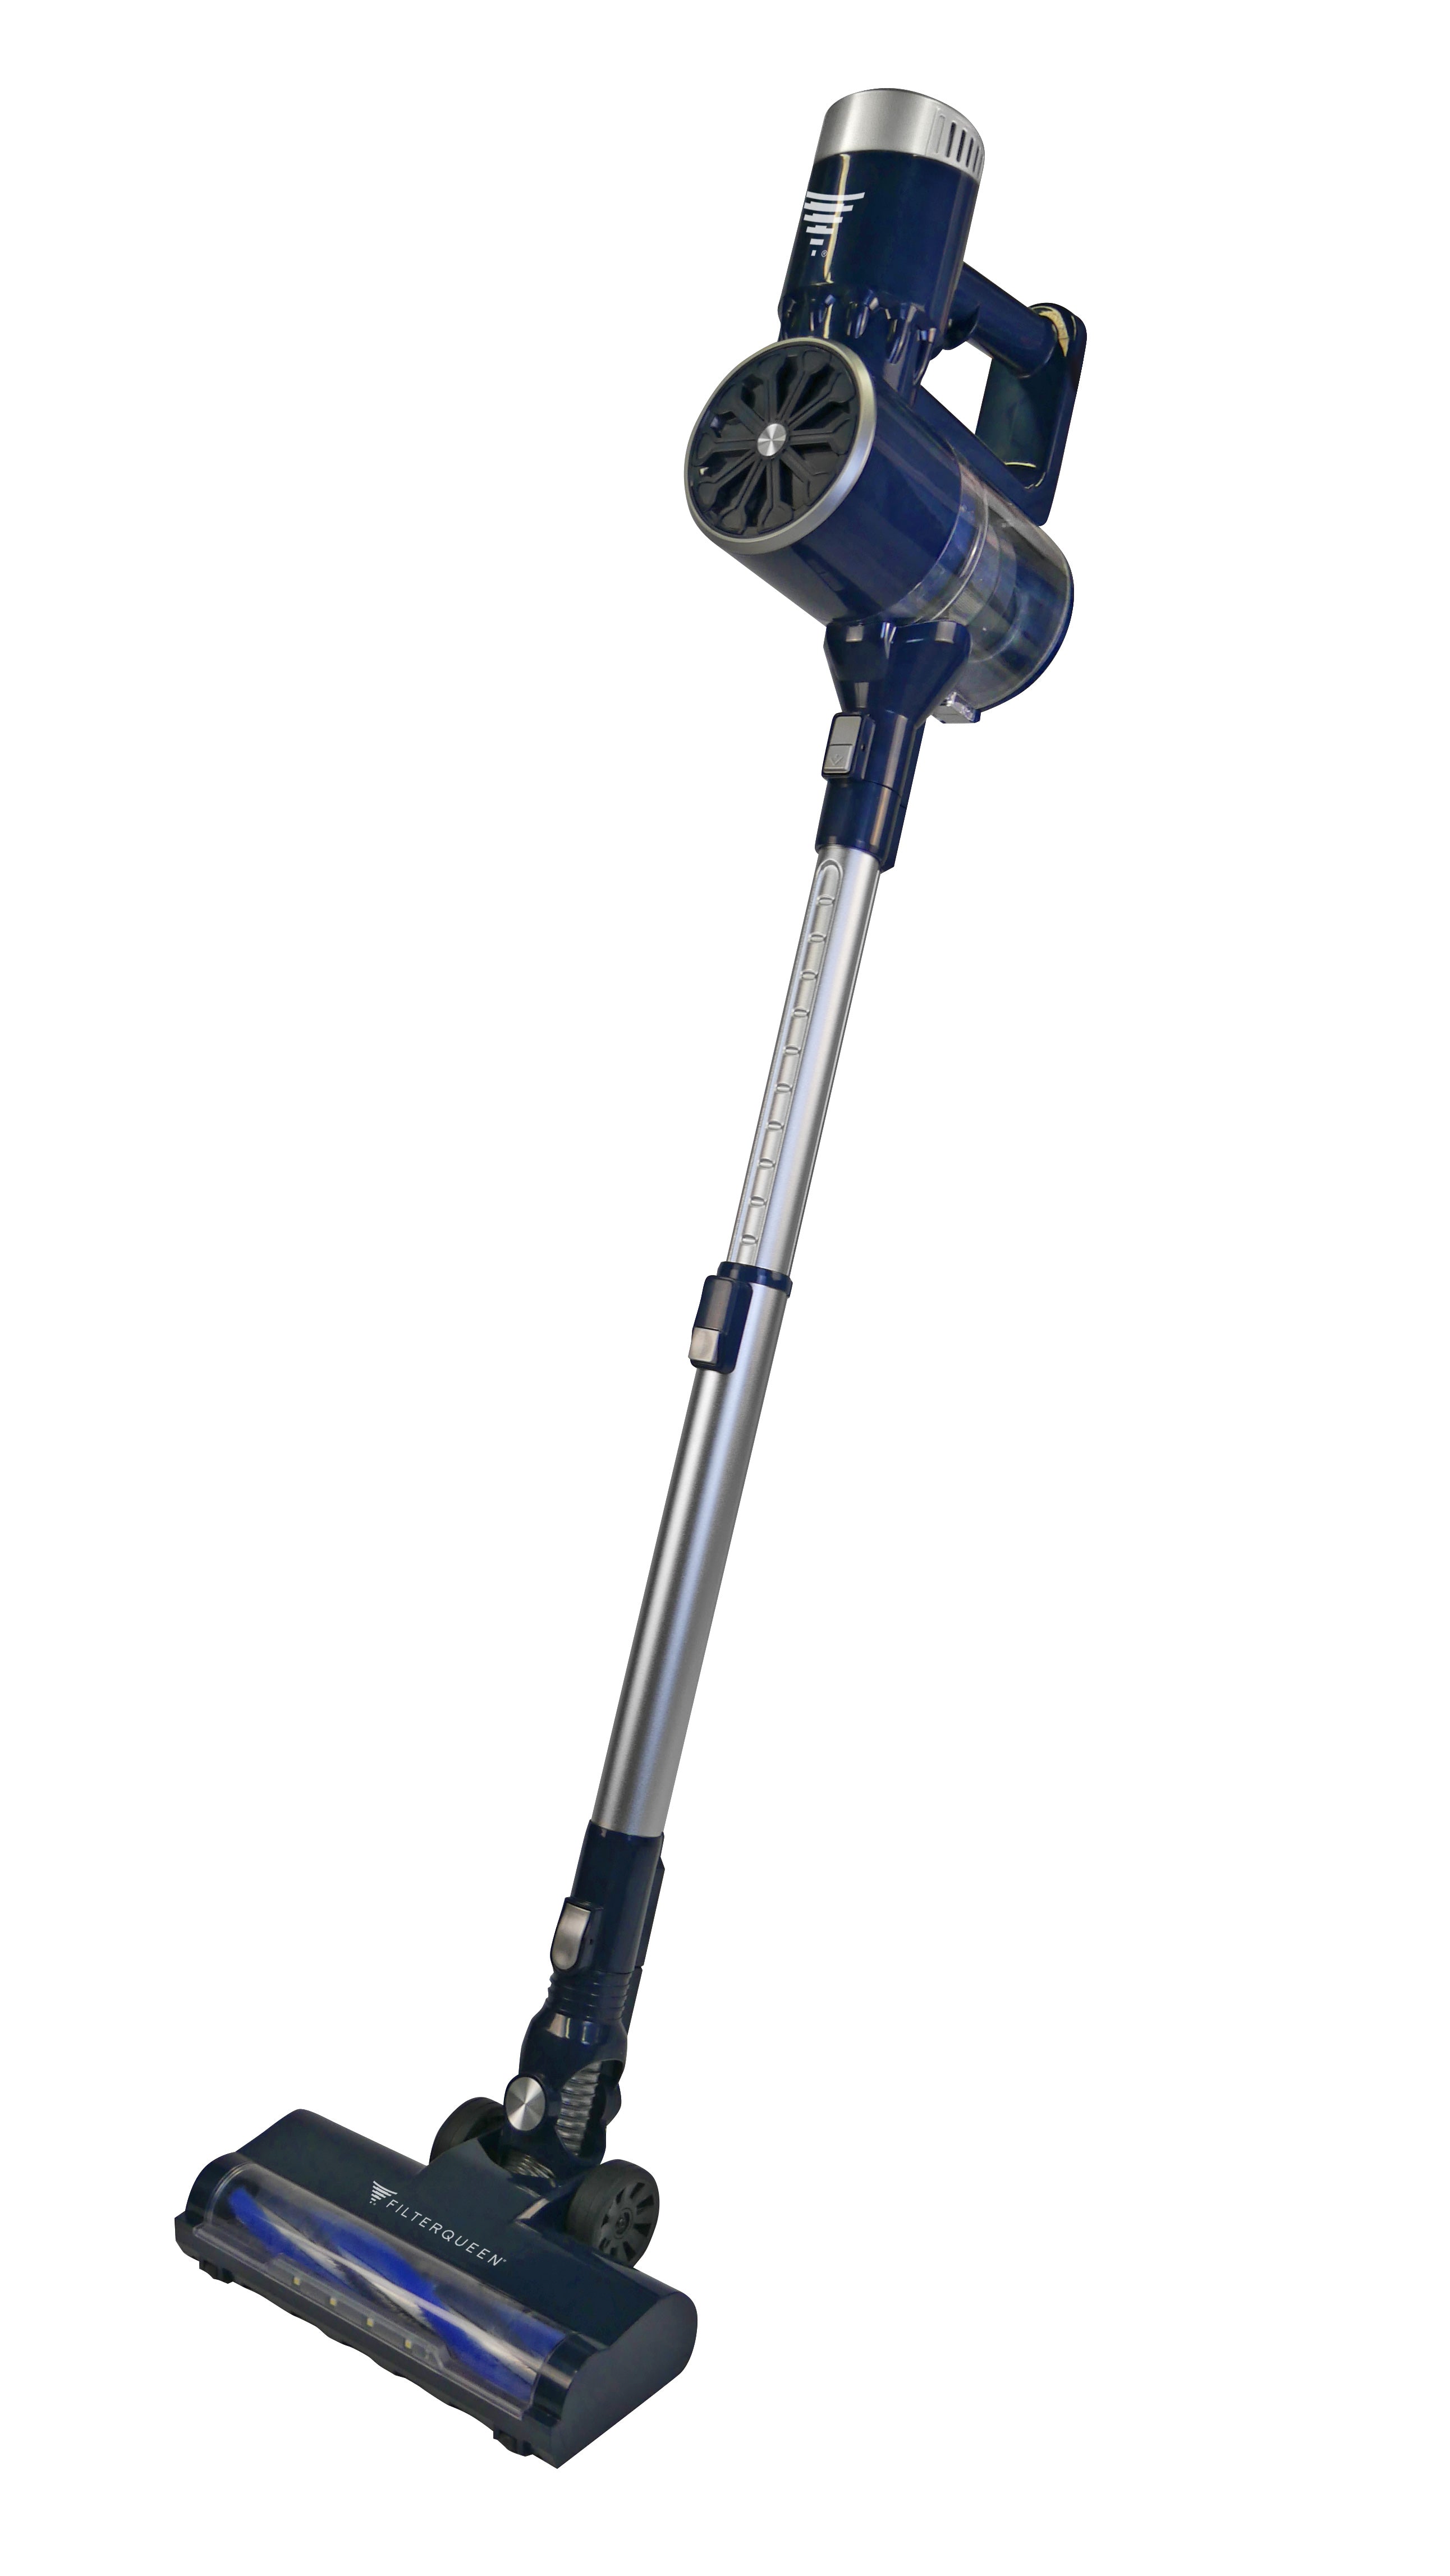 FilterQueen Cordless Stick Vacuum - Powerful Suction, Easy to Use,  Versatile Cleaning